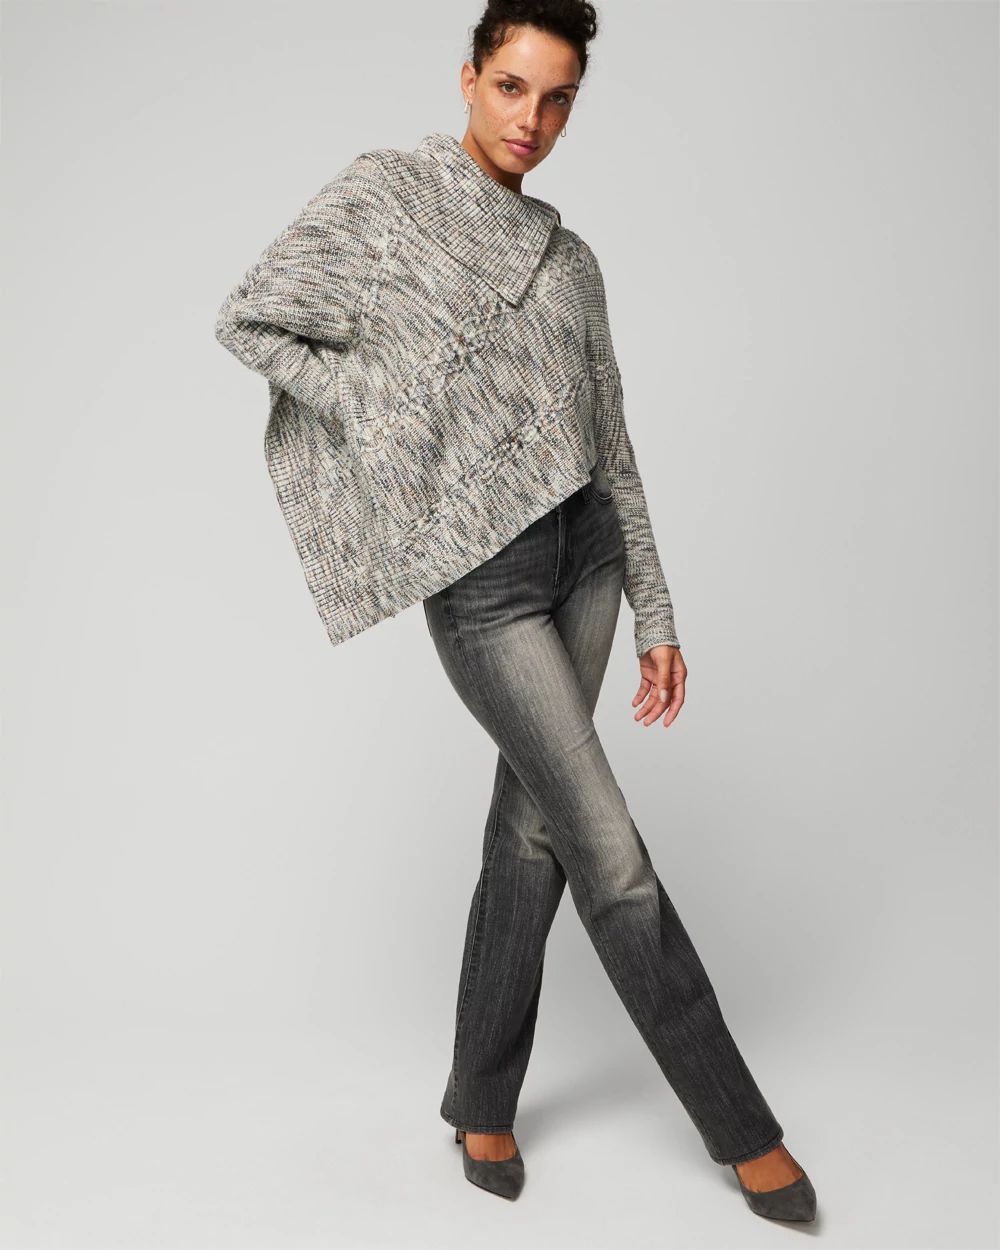 Petite Zip Neck Marled Poncho click to view larger image.